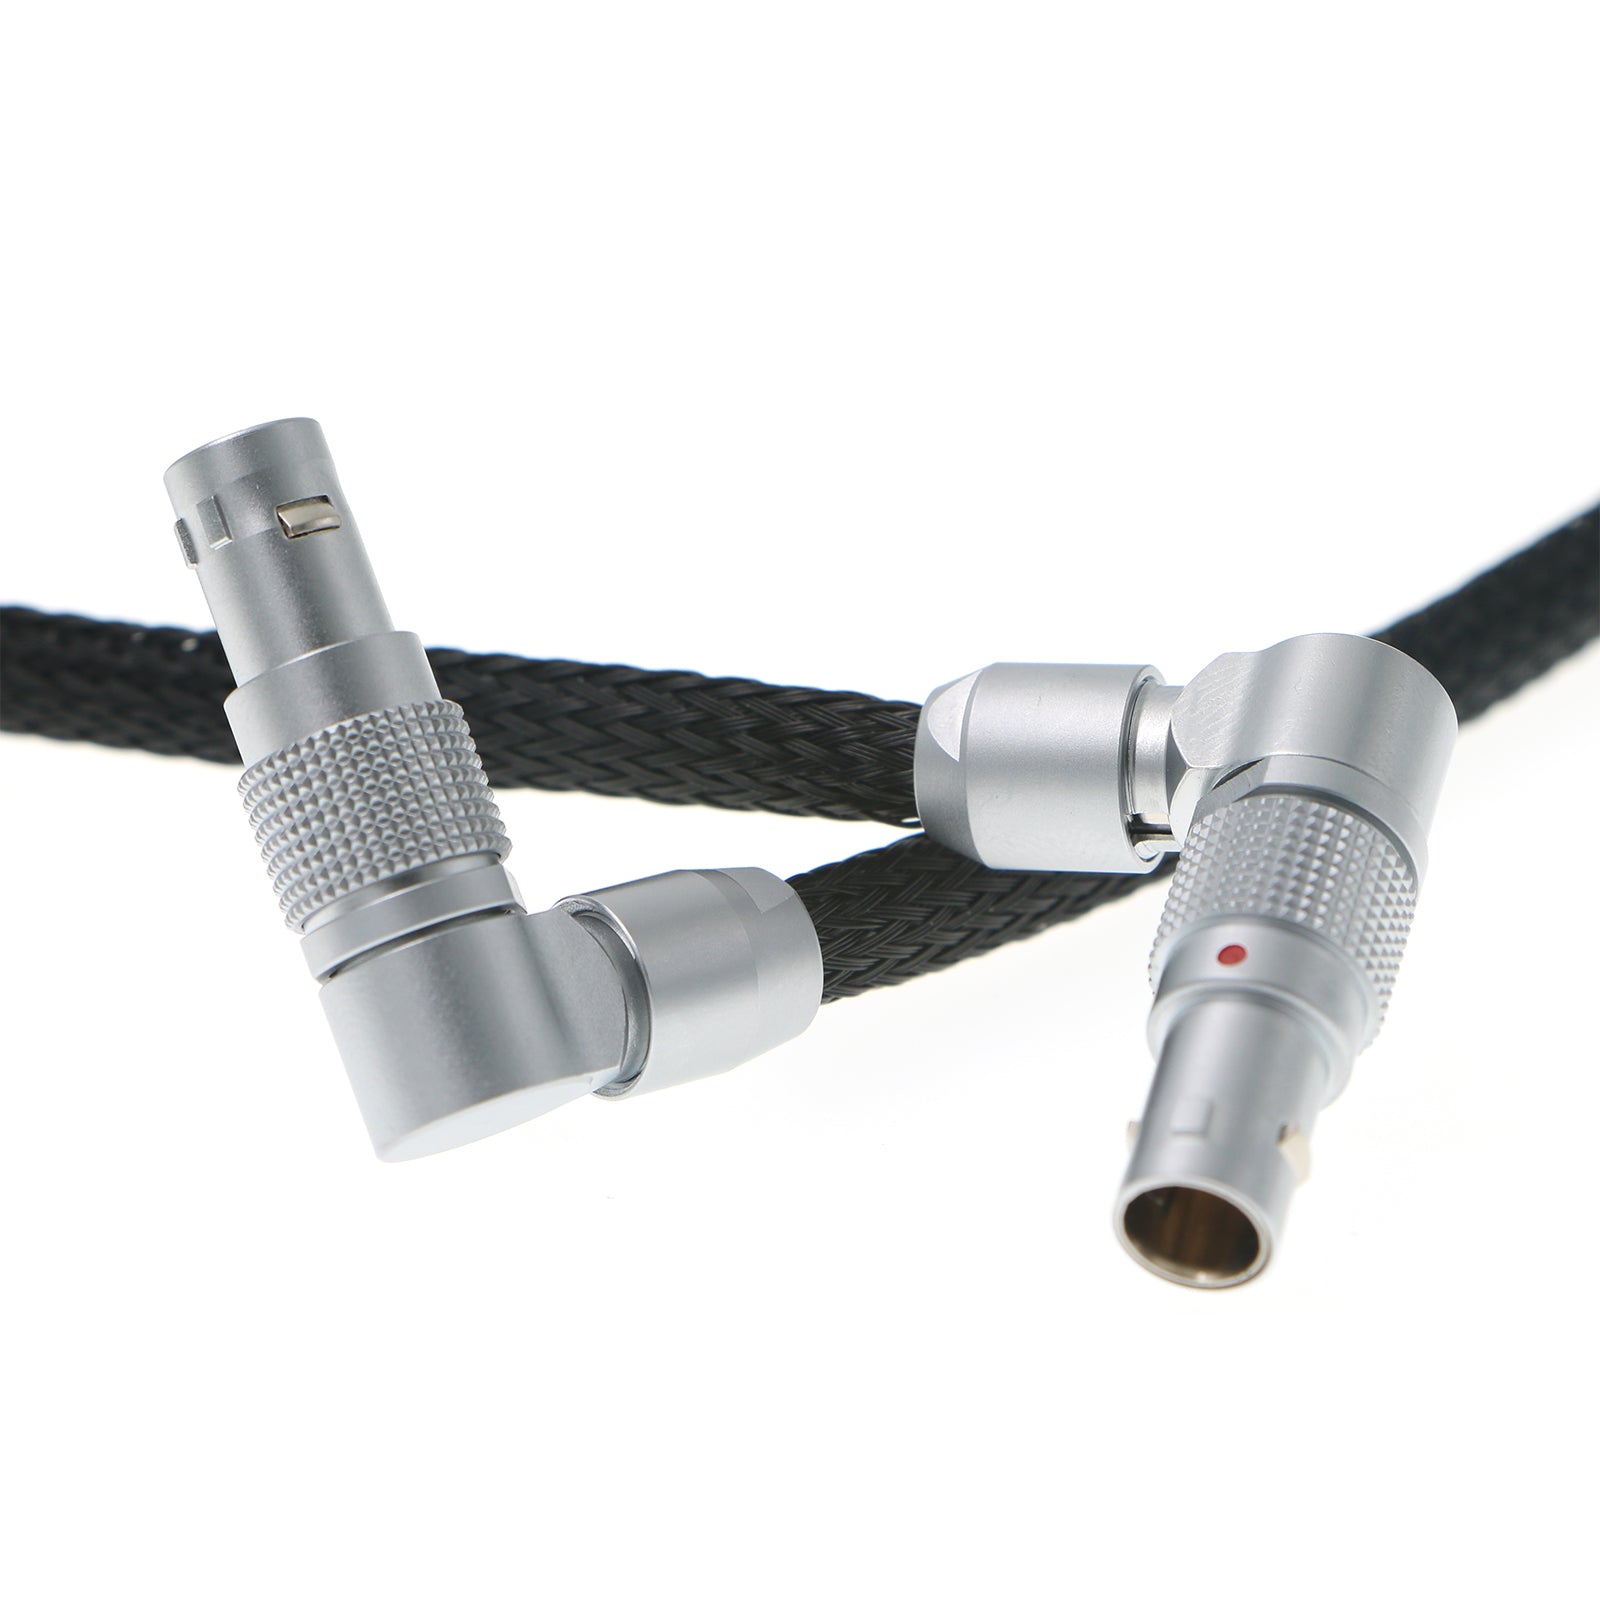 Alvin's Cables for Red-Komodo Rotatable Flexible Power-Cable 2-Pin Female to Adjustable Right-Angle 2-Pin Male Cord